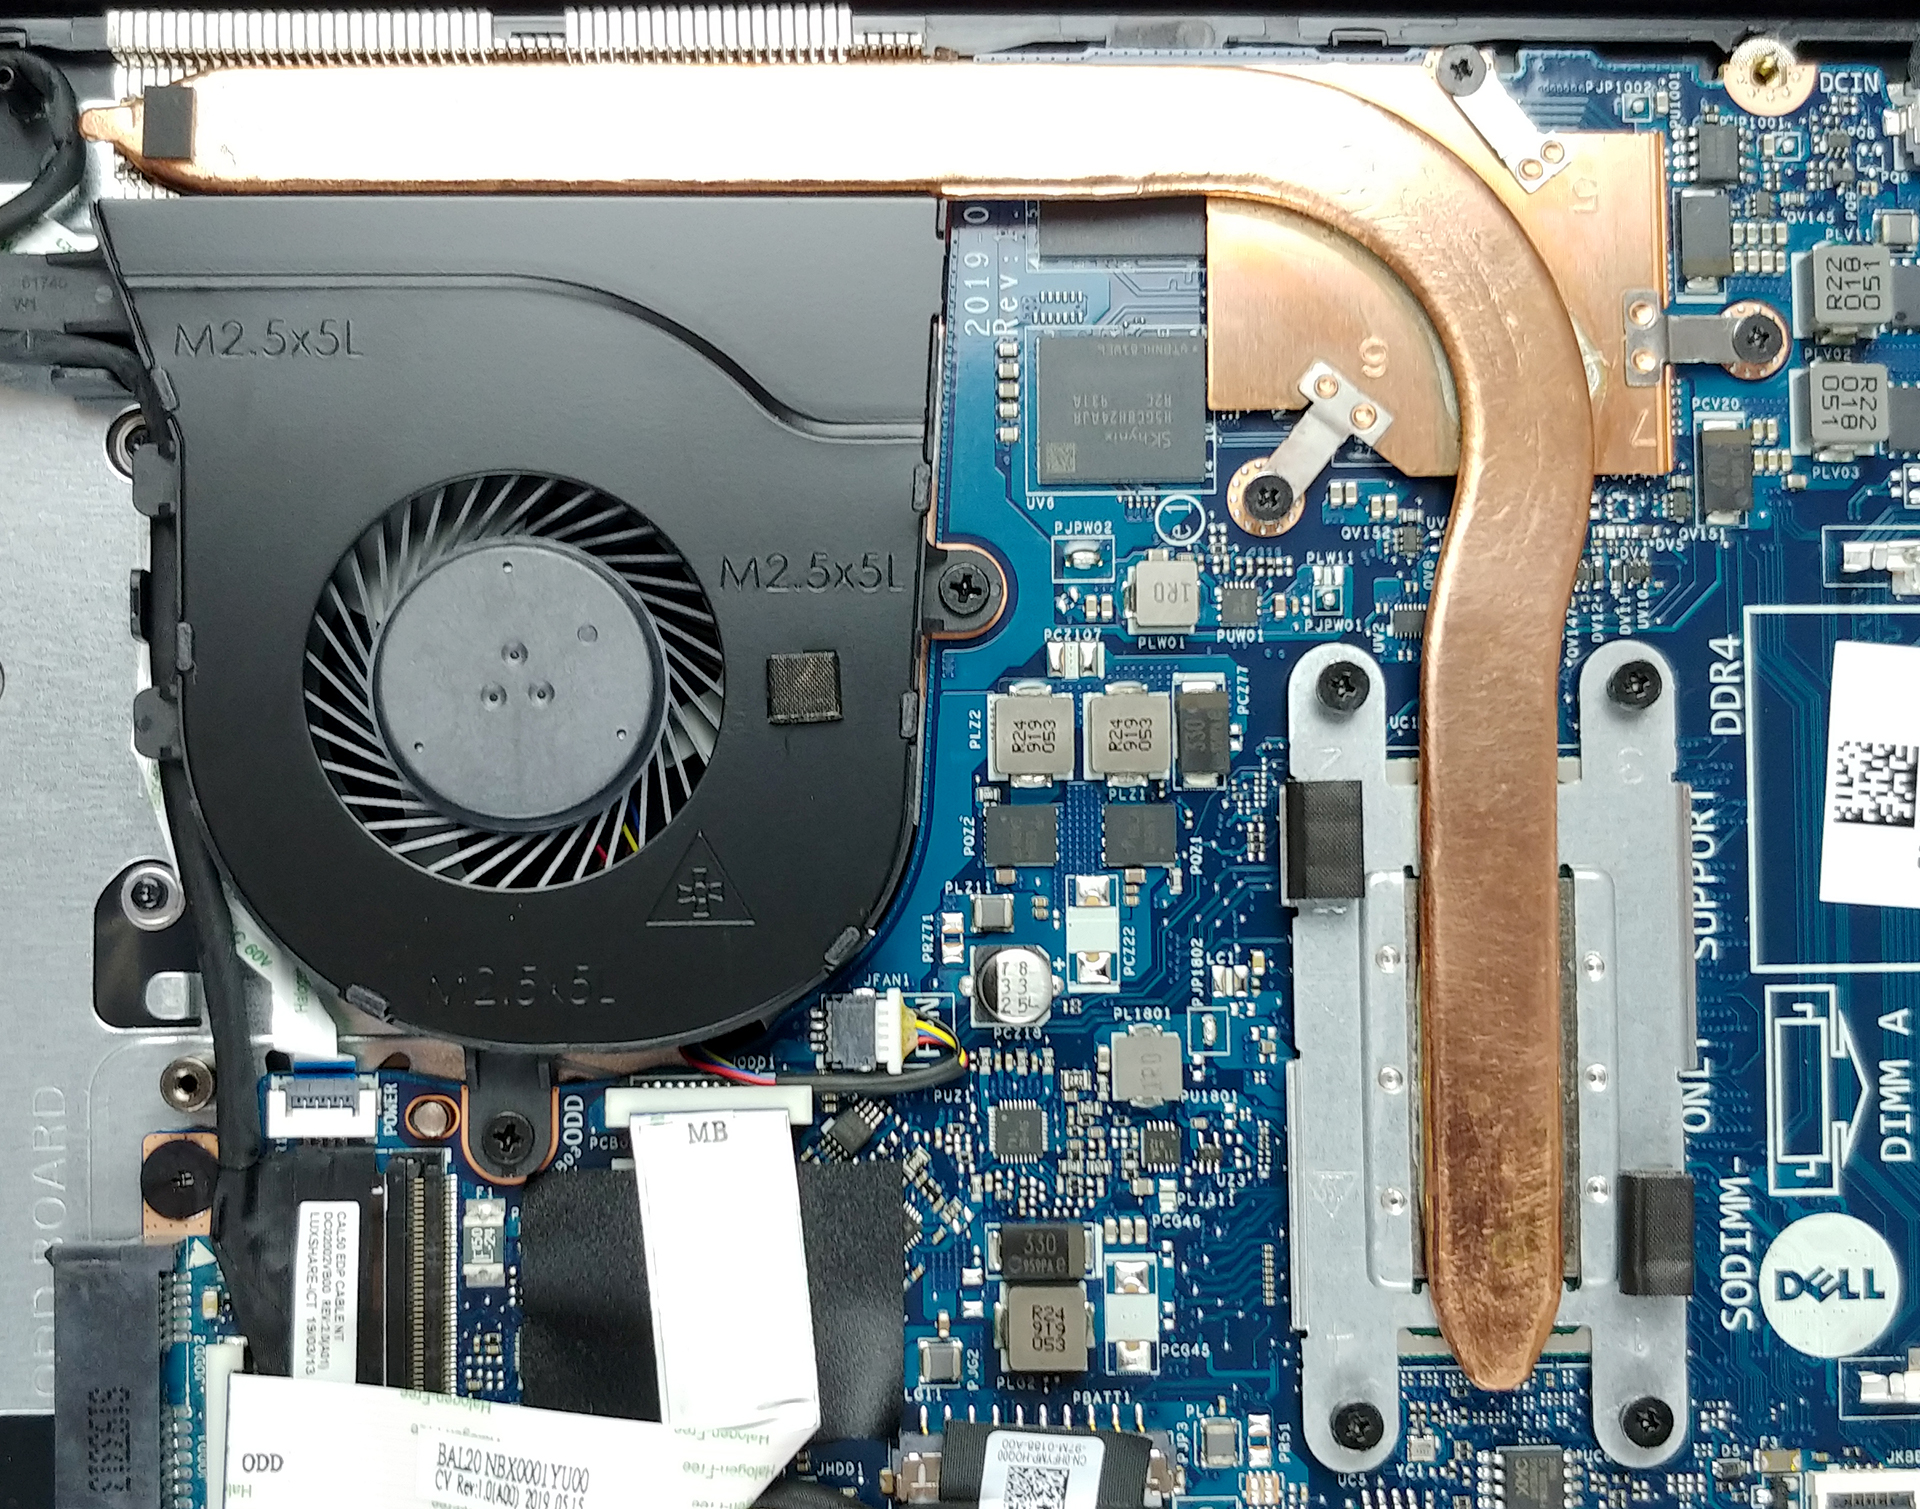 Inside Dell Inspiron 15 3593 - disassembly and upgrade options |  